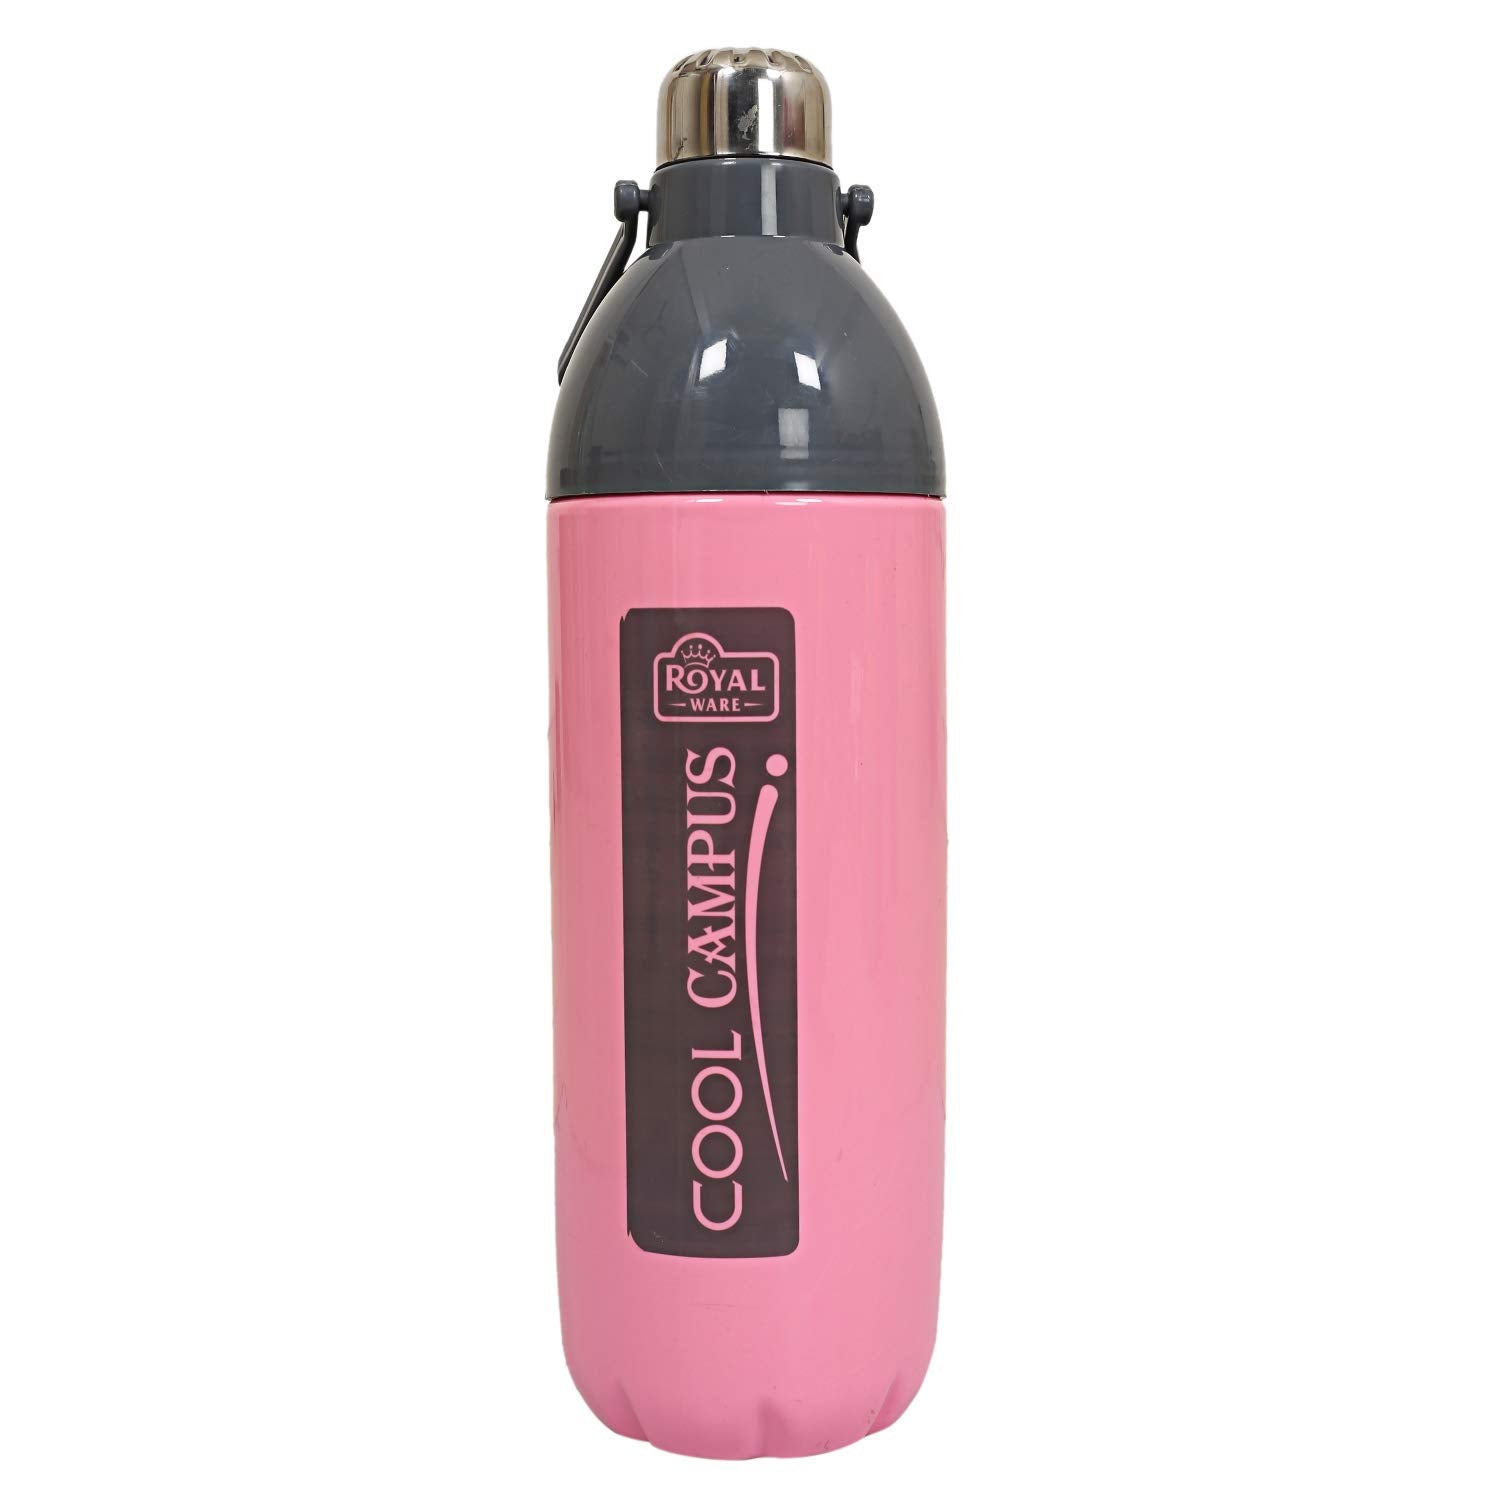 Kuber Industries Plastic Insulated Water Bottle with Handle 2200 ML (Pink) -CTLTC12692, Standard